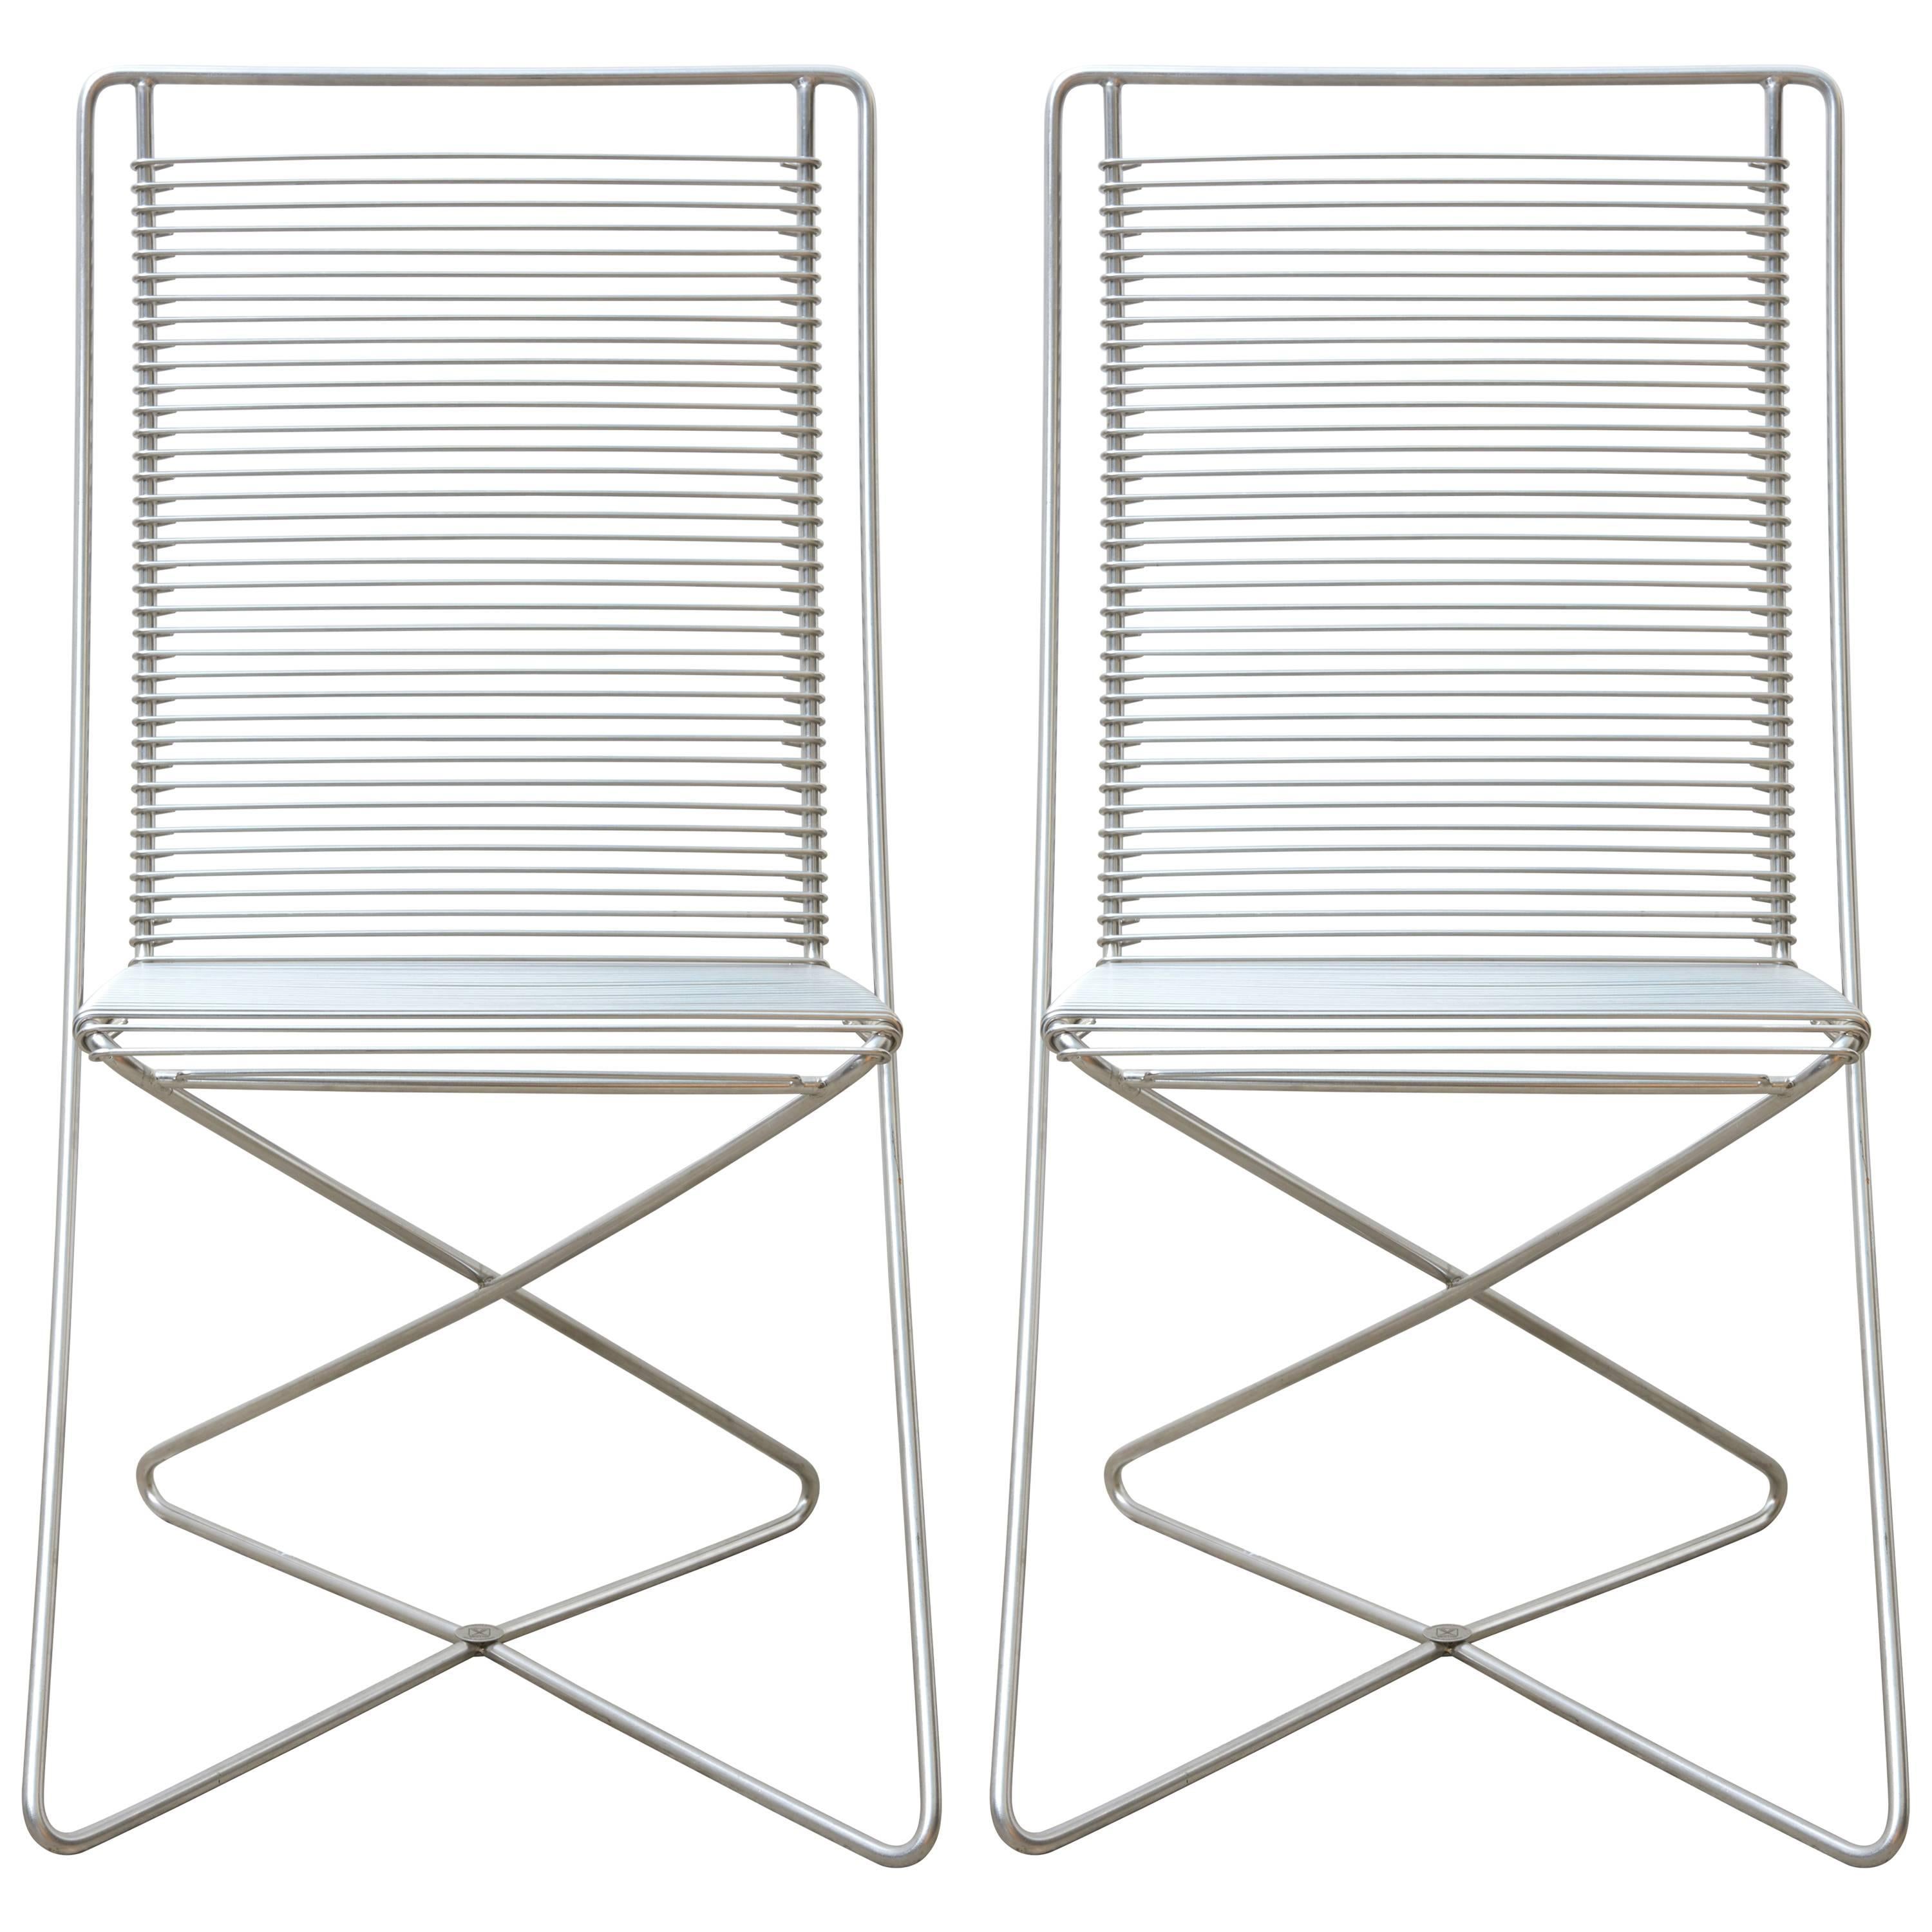 Set of Two Stackable Cantilever Chrome Wire Desk Chairs by till Behrens, 1983